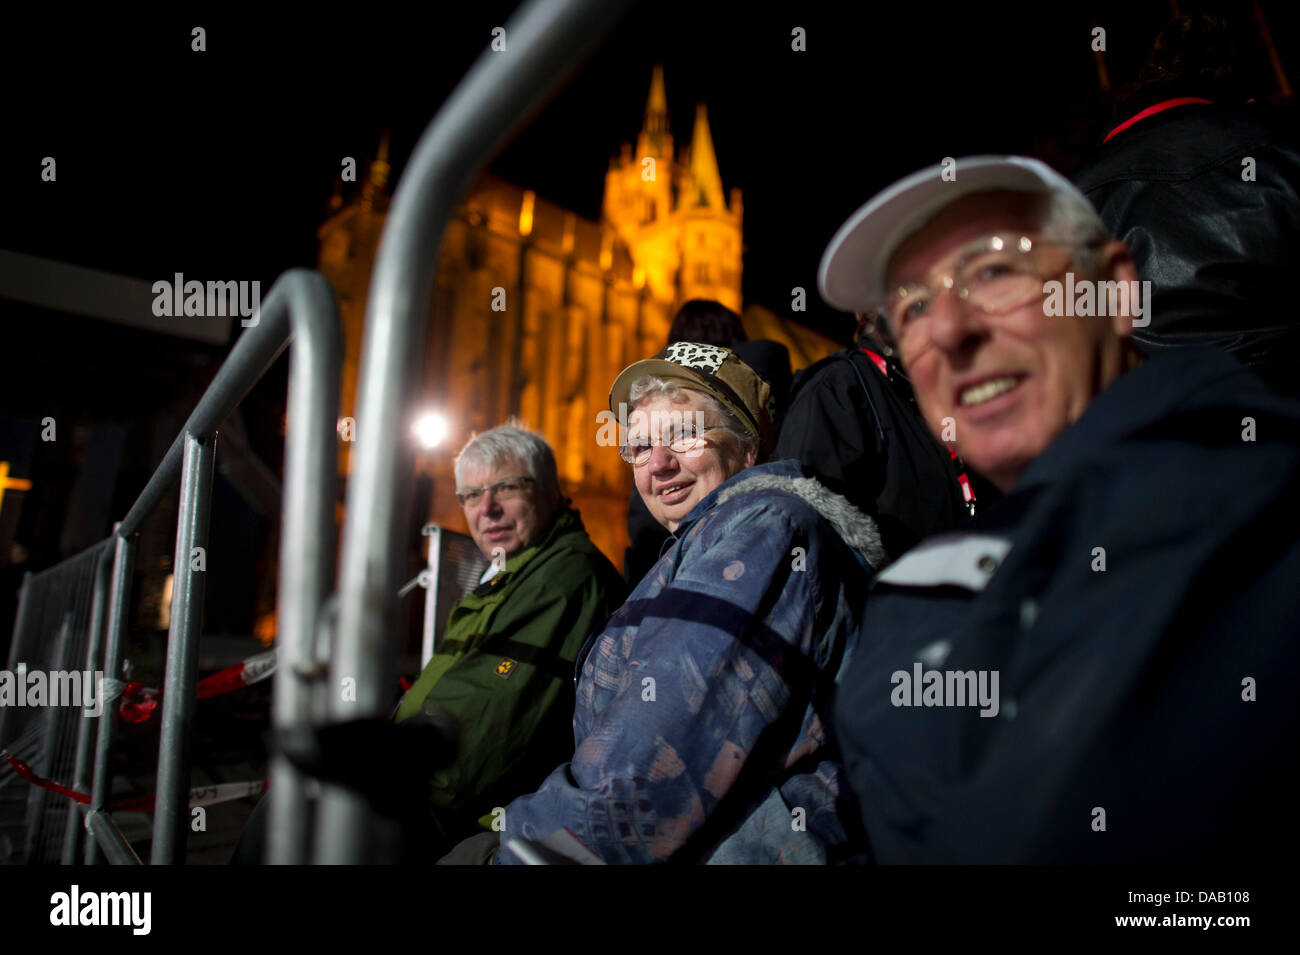 Visotors wait for a mass celebrated by the Pope at the cathedral square in Erfurt, Germany, early 24 September 2011. The head of the Roman Catholic Church is visiting Germany from 22-25 September 2011. Foto: Arno Burgi dpa/lth Stock Photo